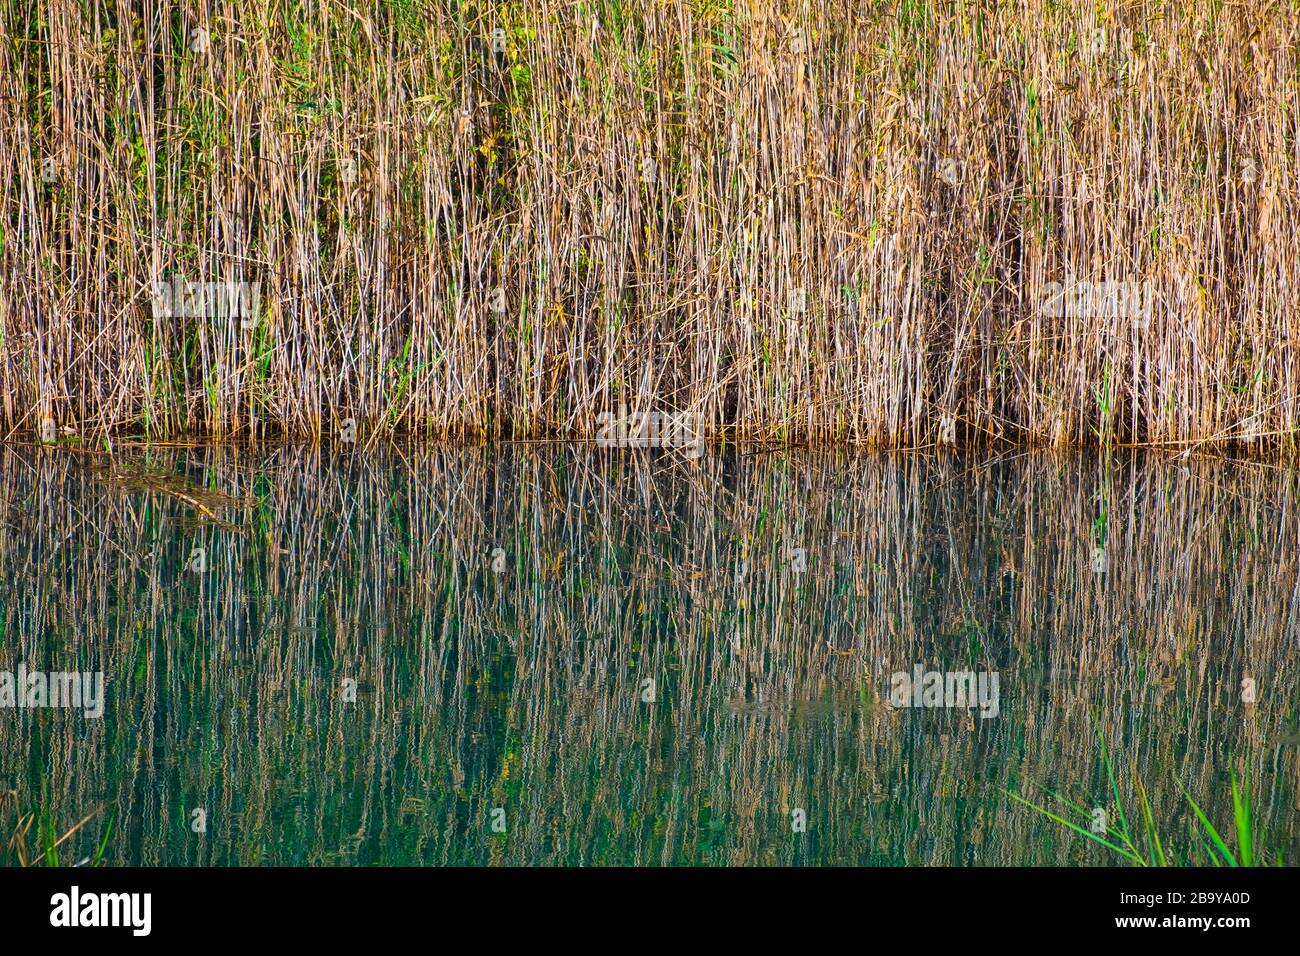 Reflection of reeds alongside the  River Vedat in the Marjal at Font Salada, Oliva, SpainThe Marjal at Font Salada, Oliva, Spain Stock Photo